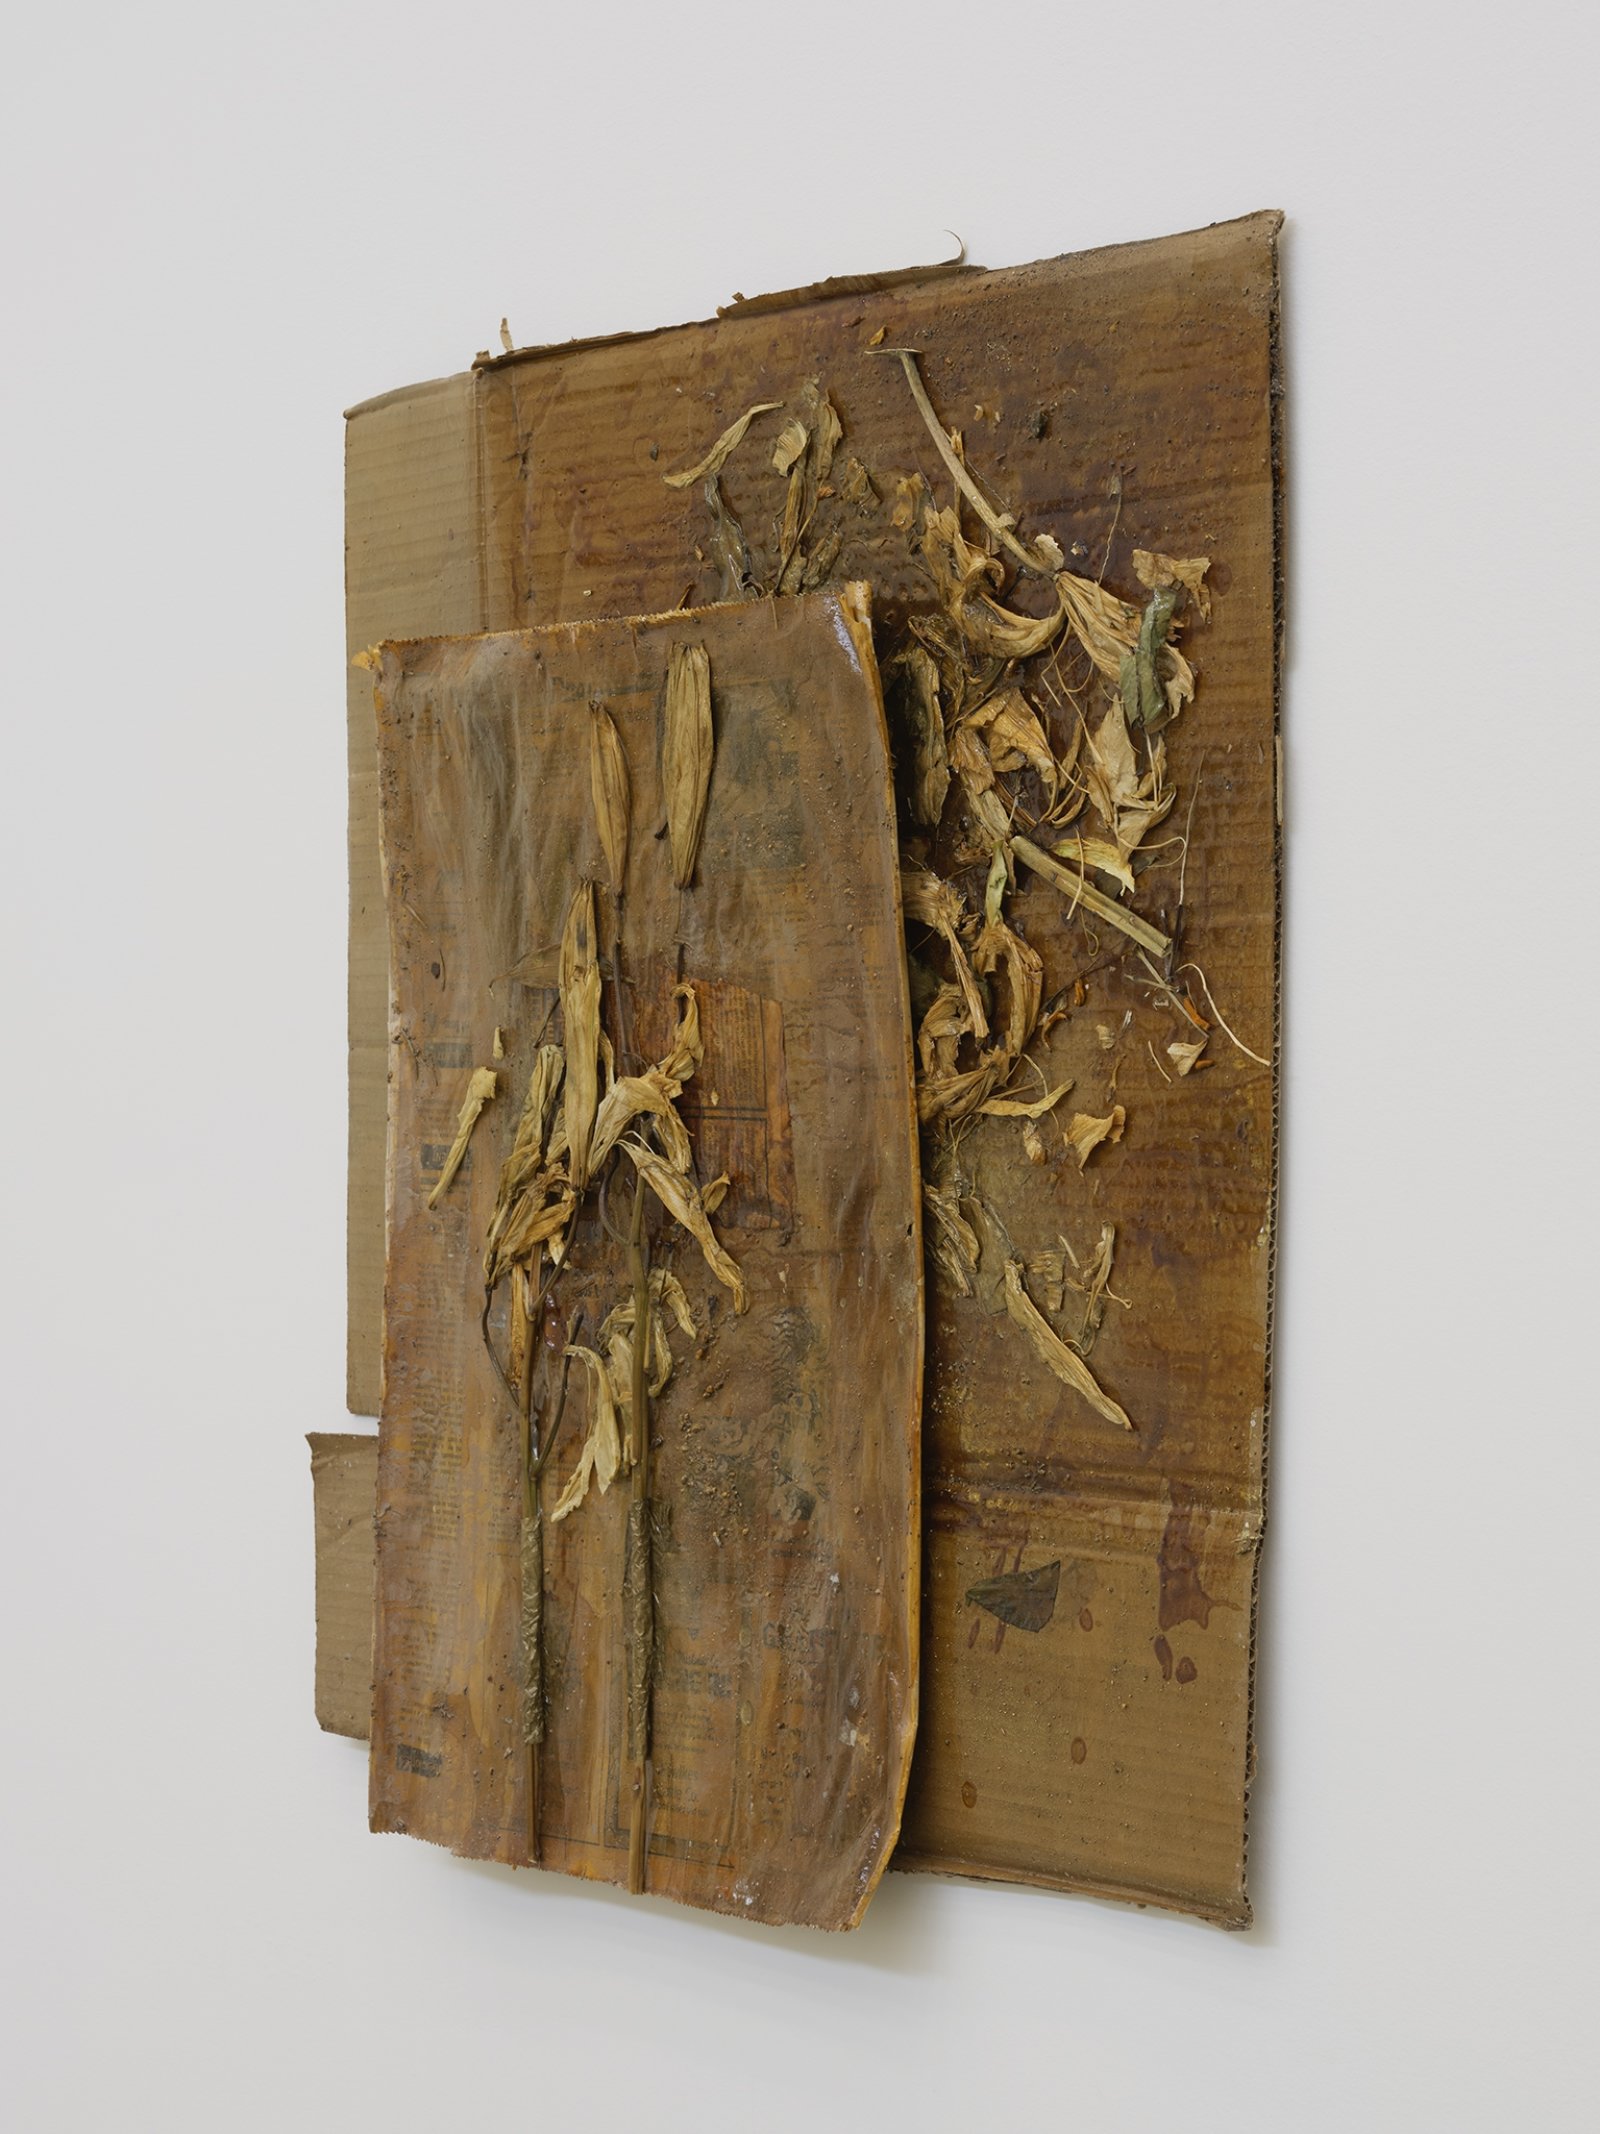 Rochelle Goldberg, Dirty Wall X, 2019, cardboard, newsprint, tissue paper, lilies, shellac, gold pigment, dirt from the river, 28 x 28 in. (71 x 71 cm) by Rochelle Goldberg